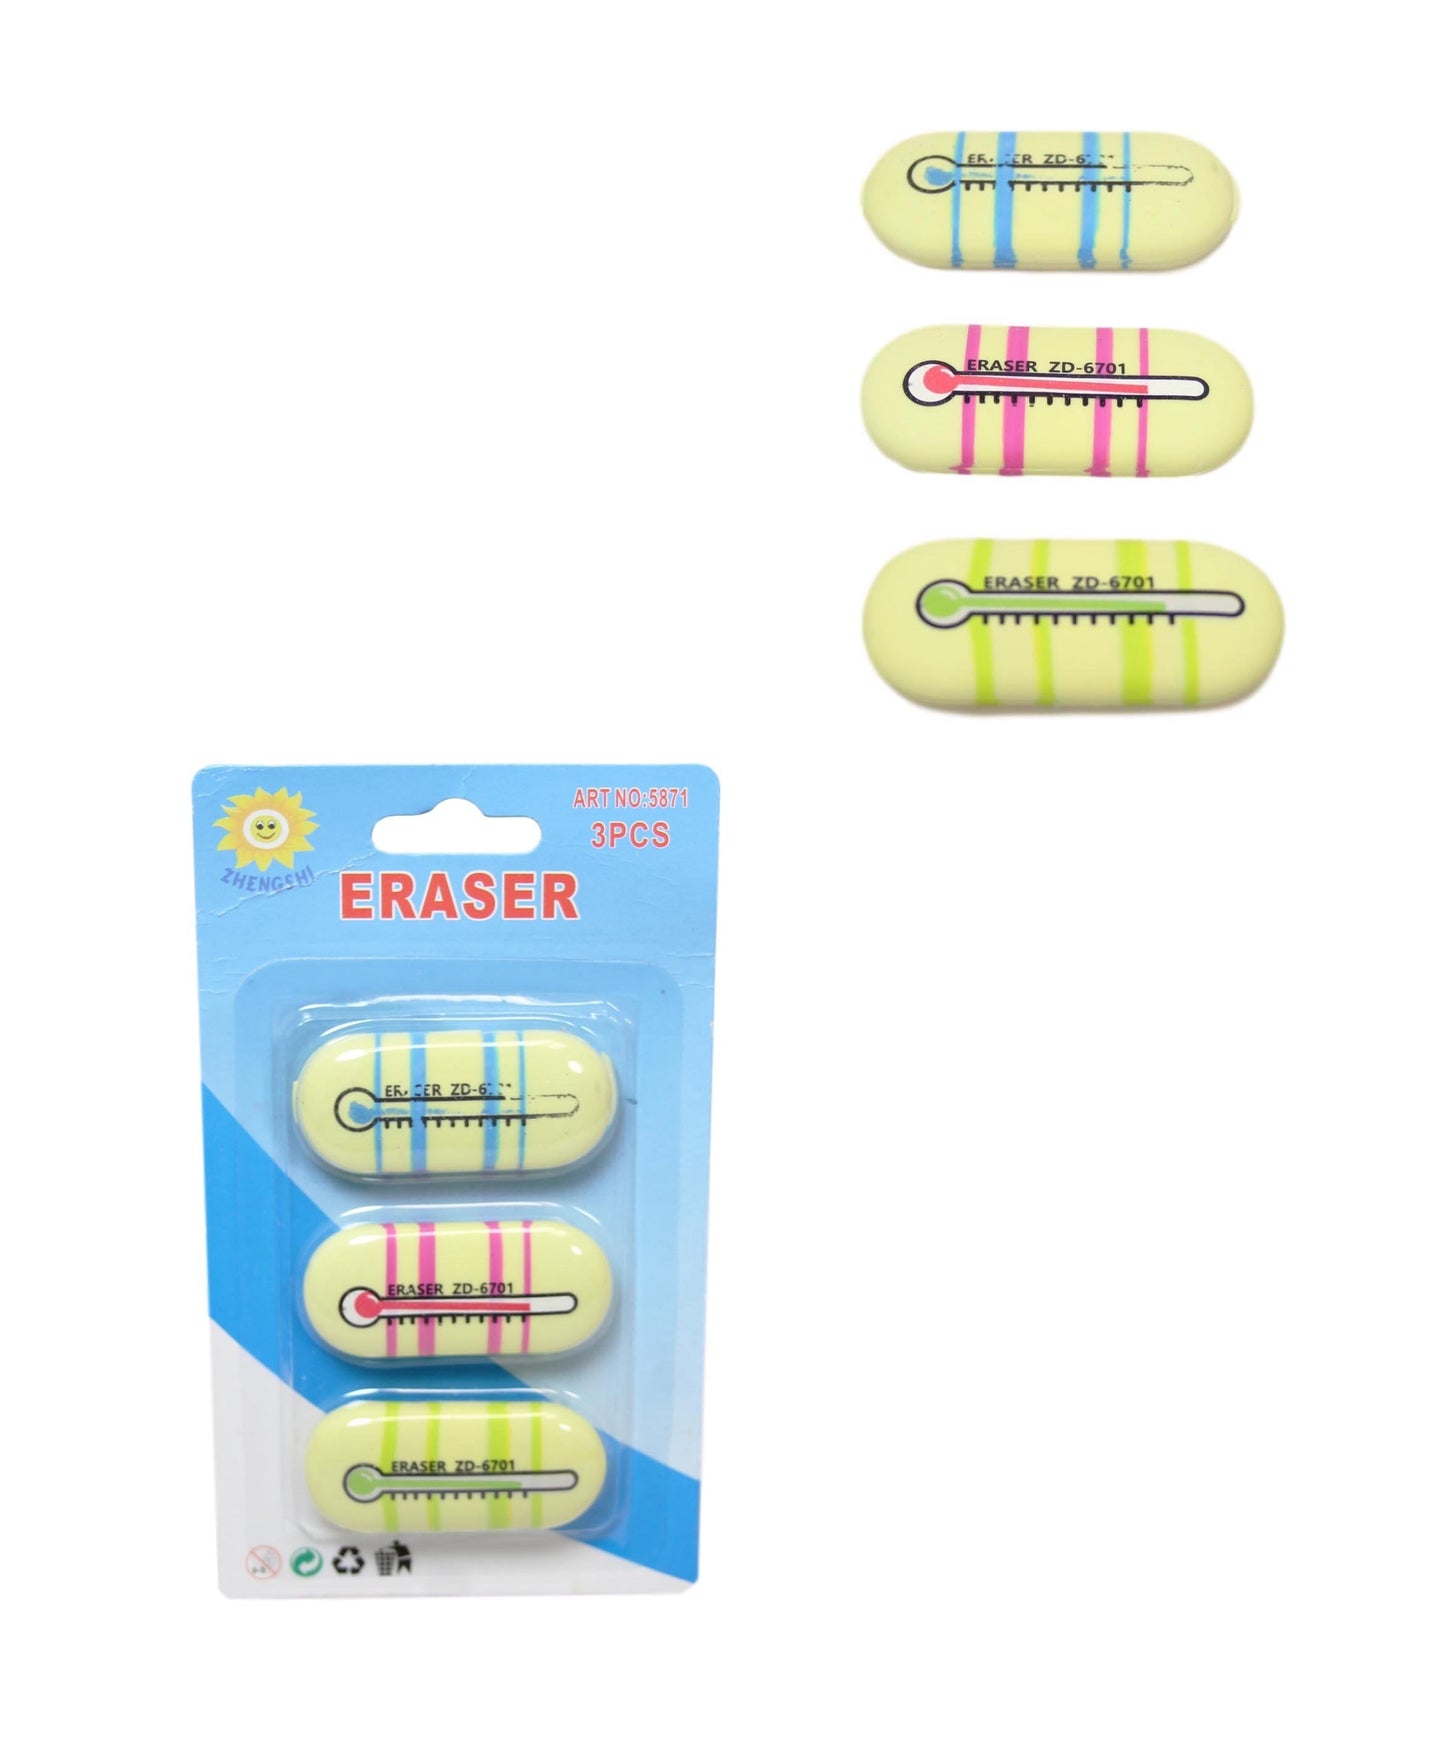 Stationary School Eraser Rubber Thermometer Themed 5 x 0.5 cm Pack of 3 Assorted Colours 5871 (Large Letter Rate)